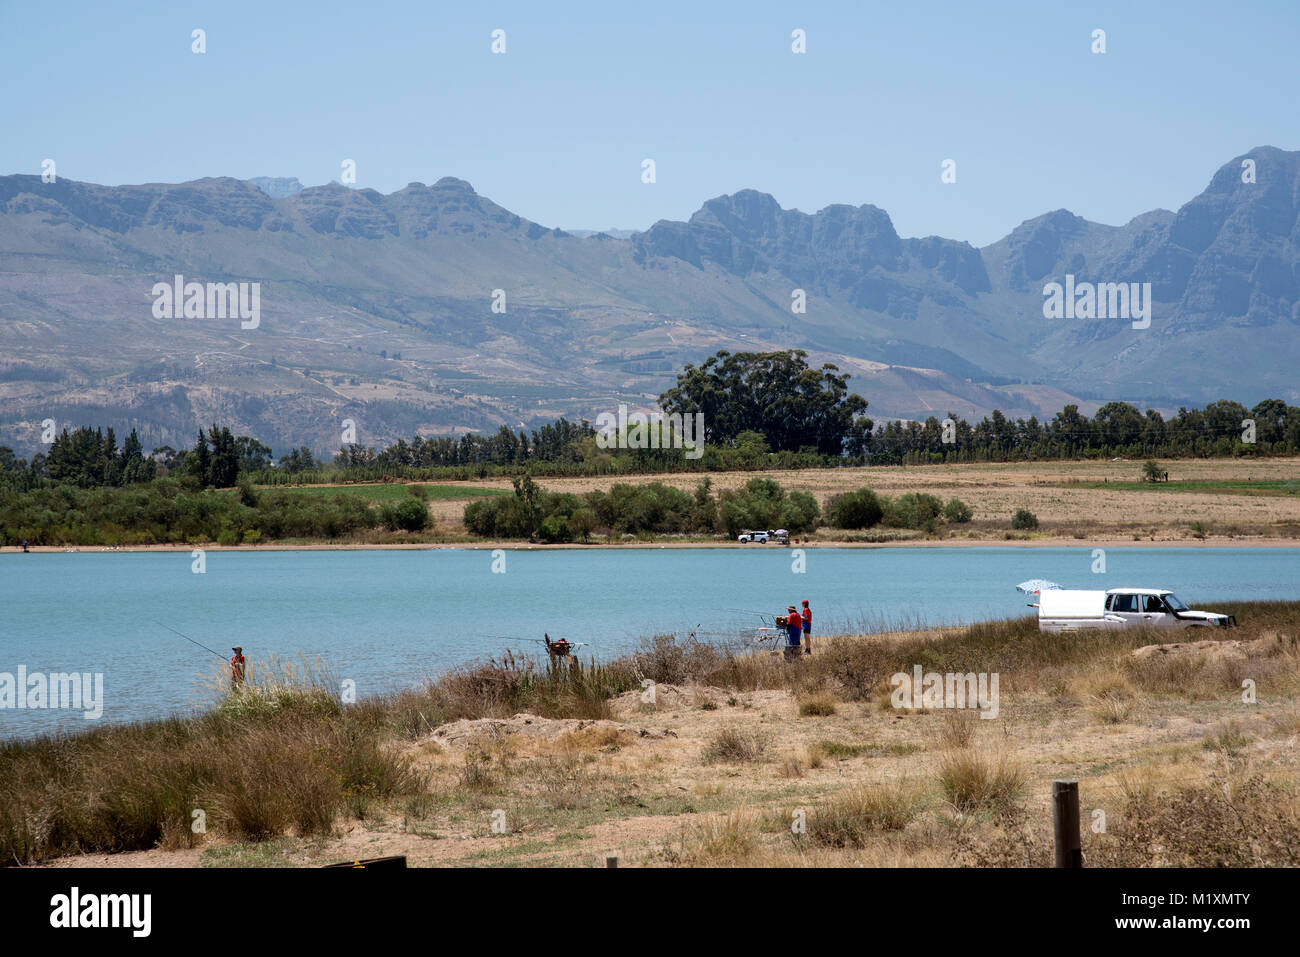 People fishing on a Paarl reservoir in the Western cape South Africa Stock Photo